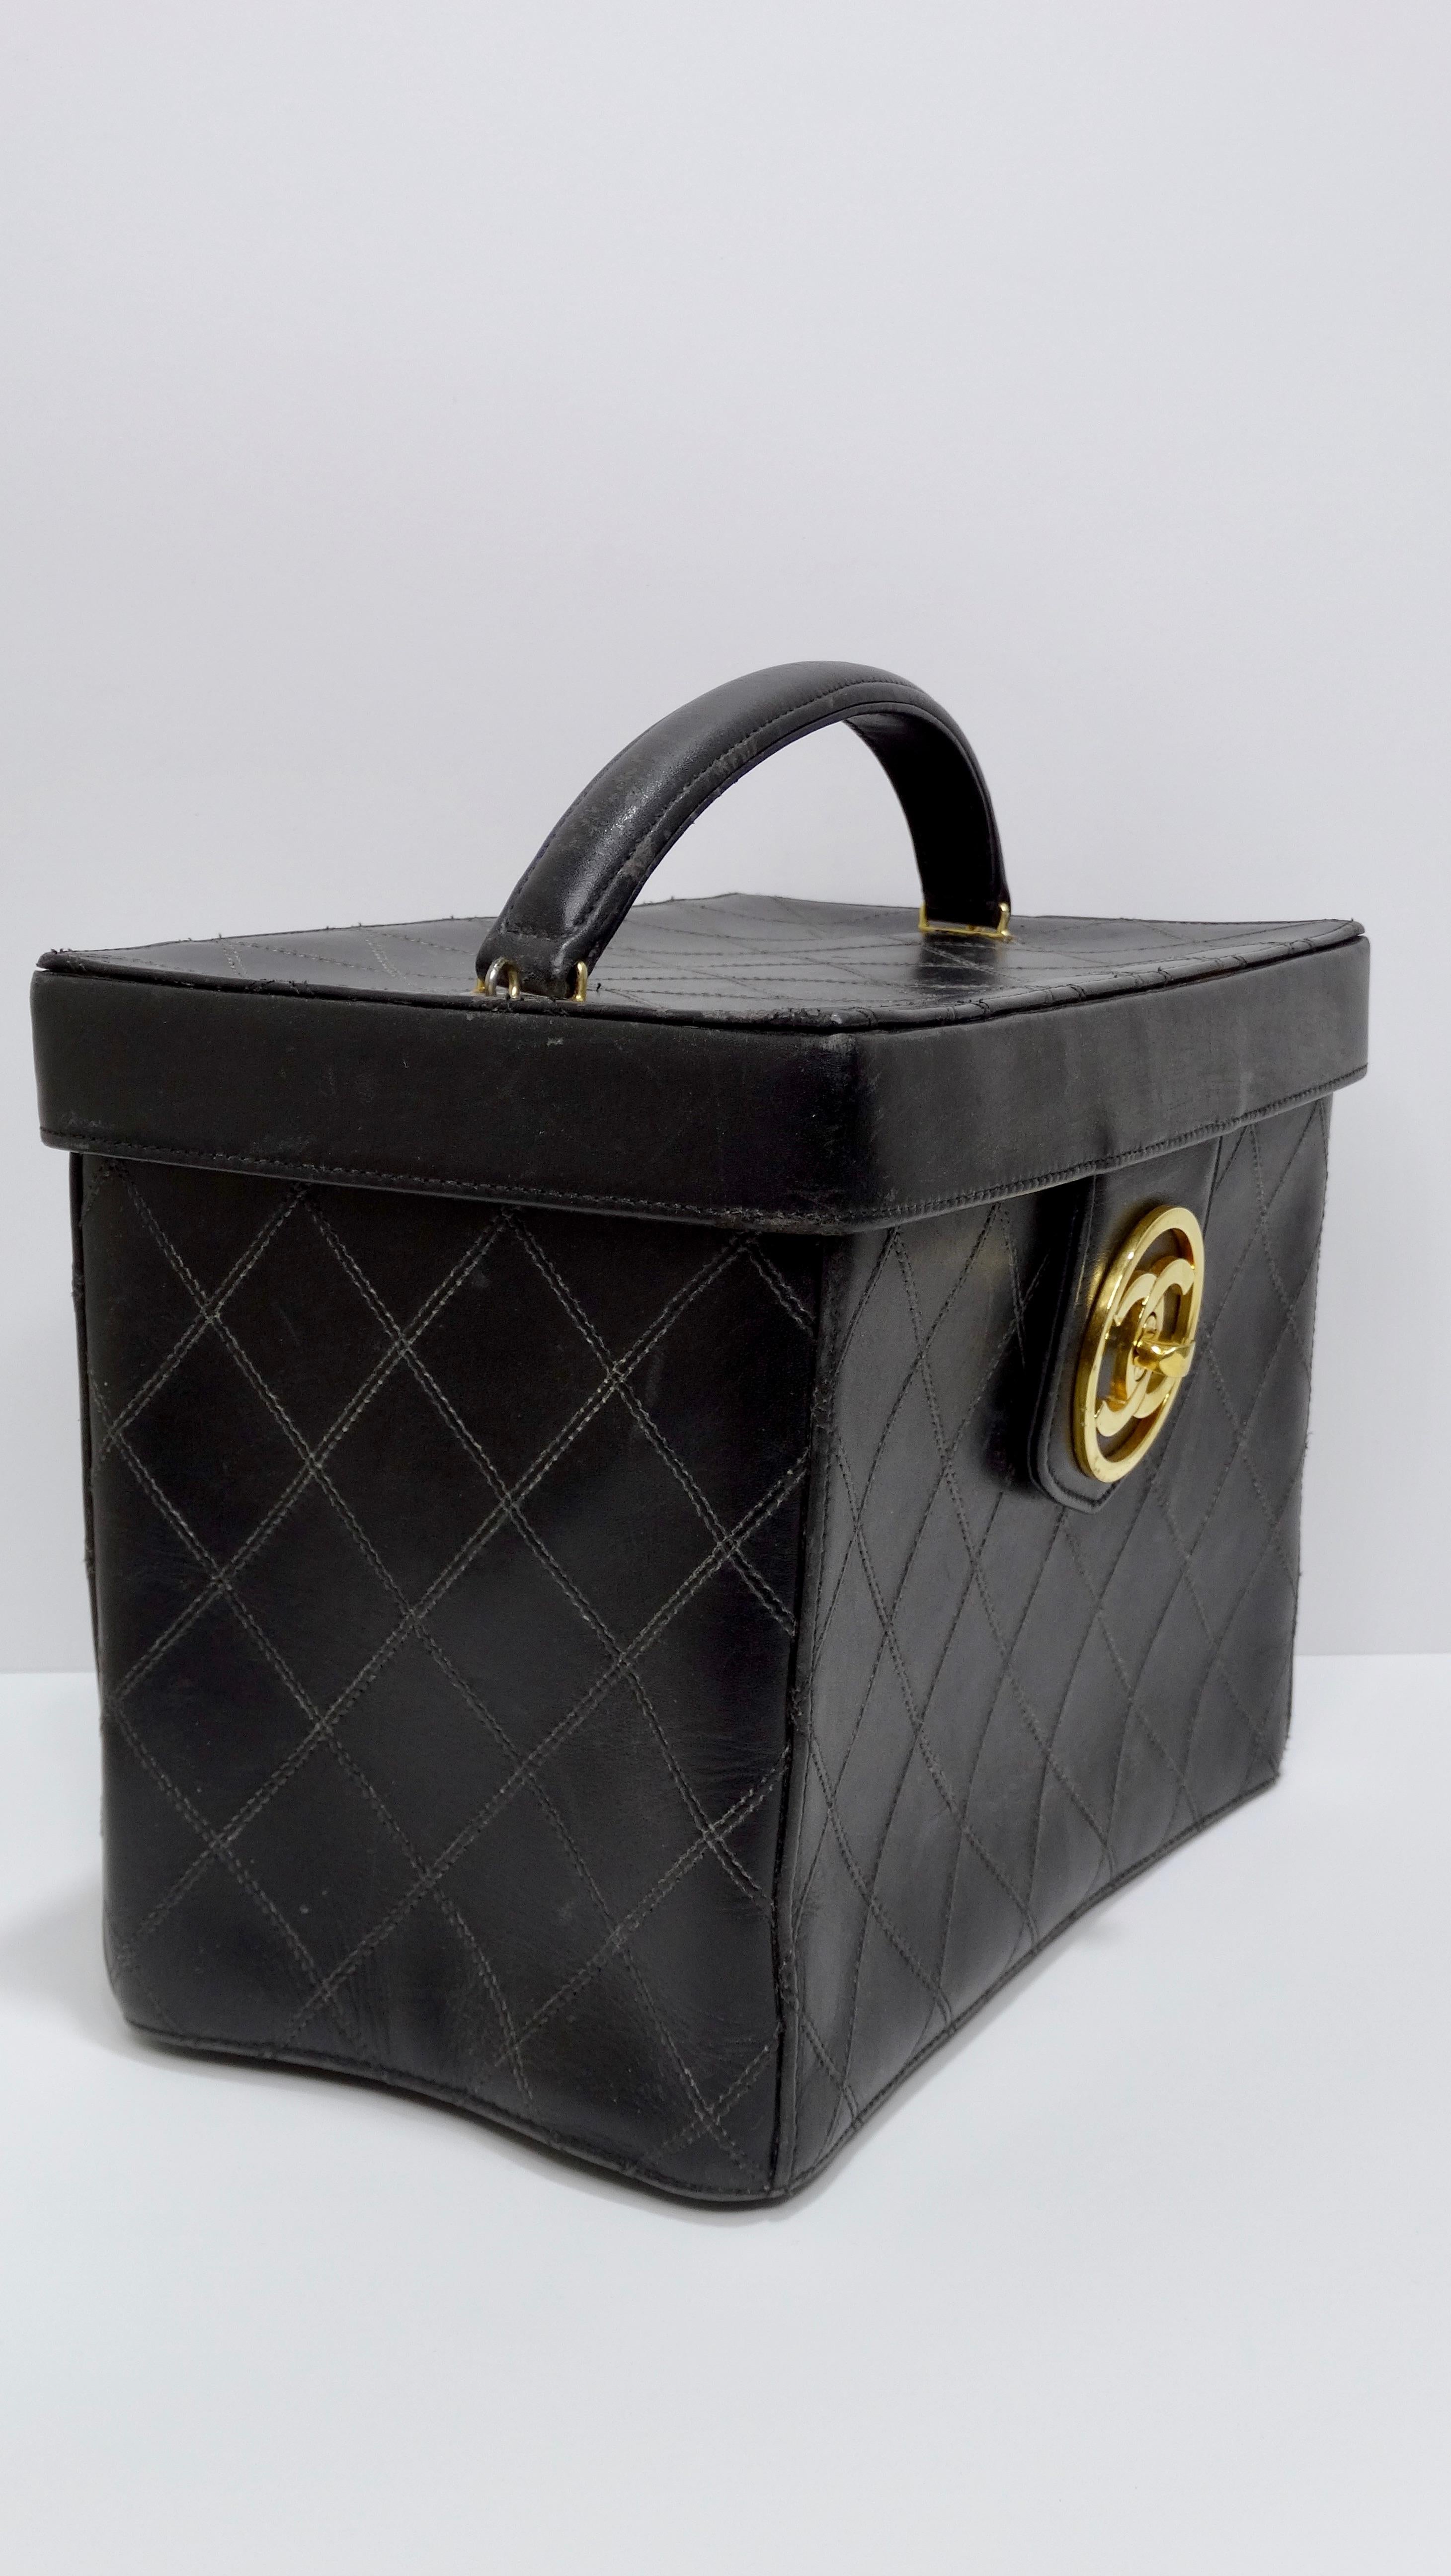 Chanel Vintage Quilted Leather Vanity Case  In Good Condition For Sale In Scottsdale, AZ